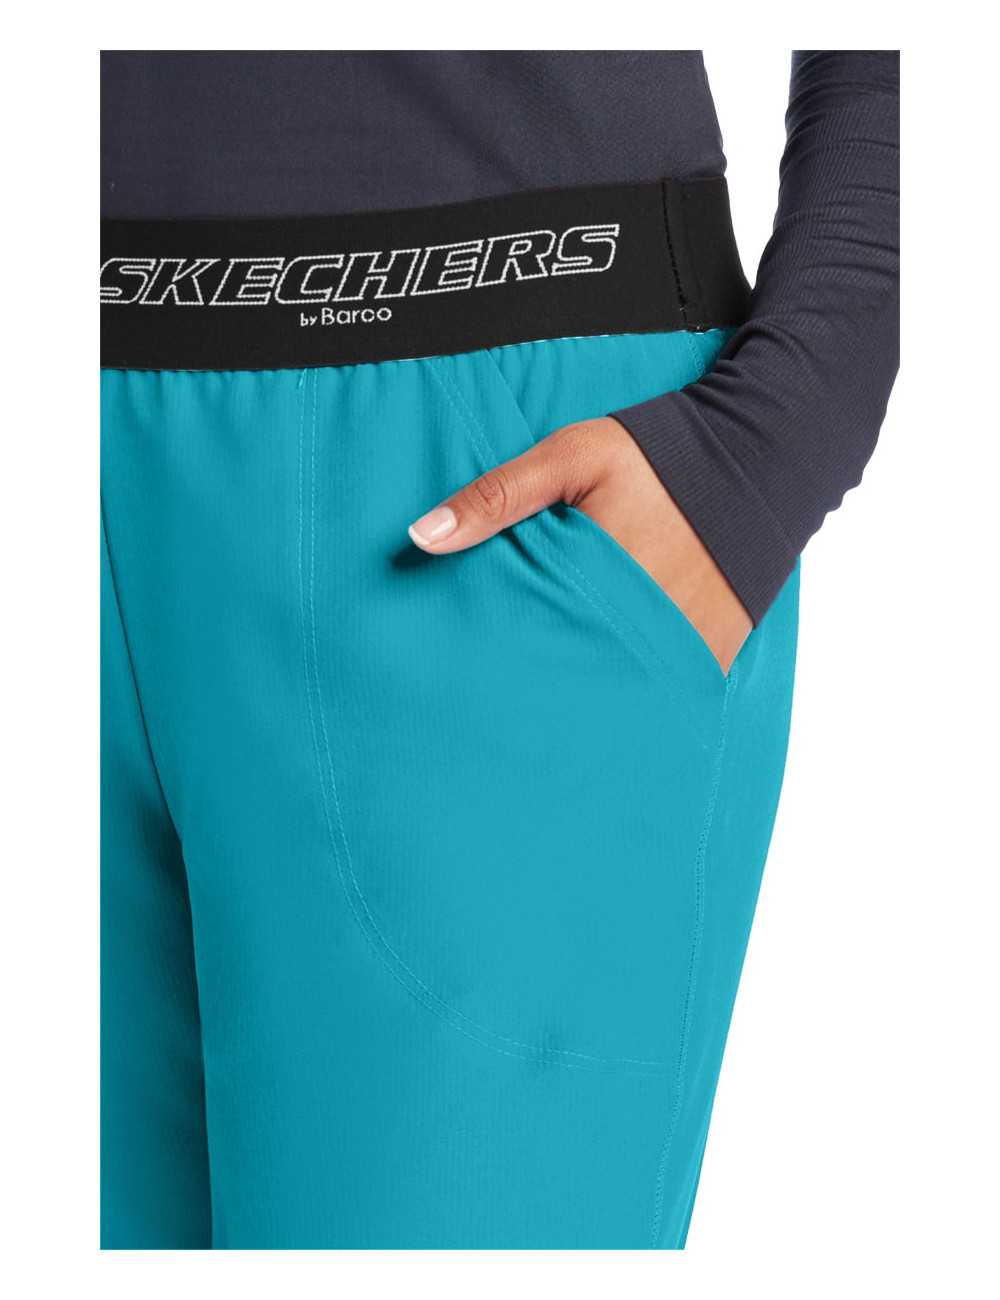 https://www.mankaia.com/14730-zoom_product/women-s-medical-trousers-skechers-collection-sk202-.jpg